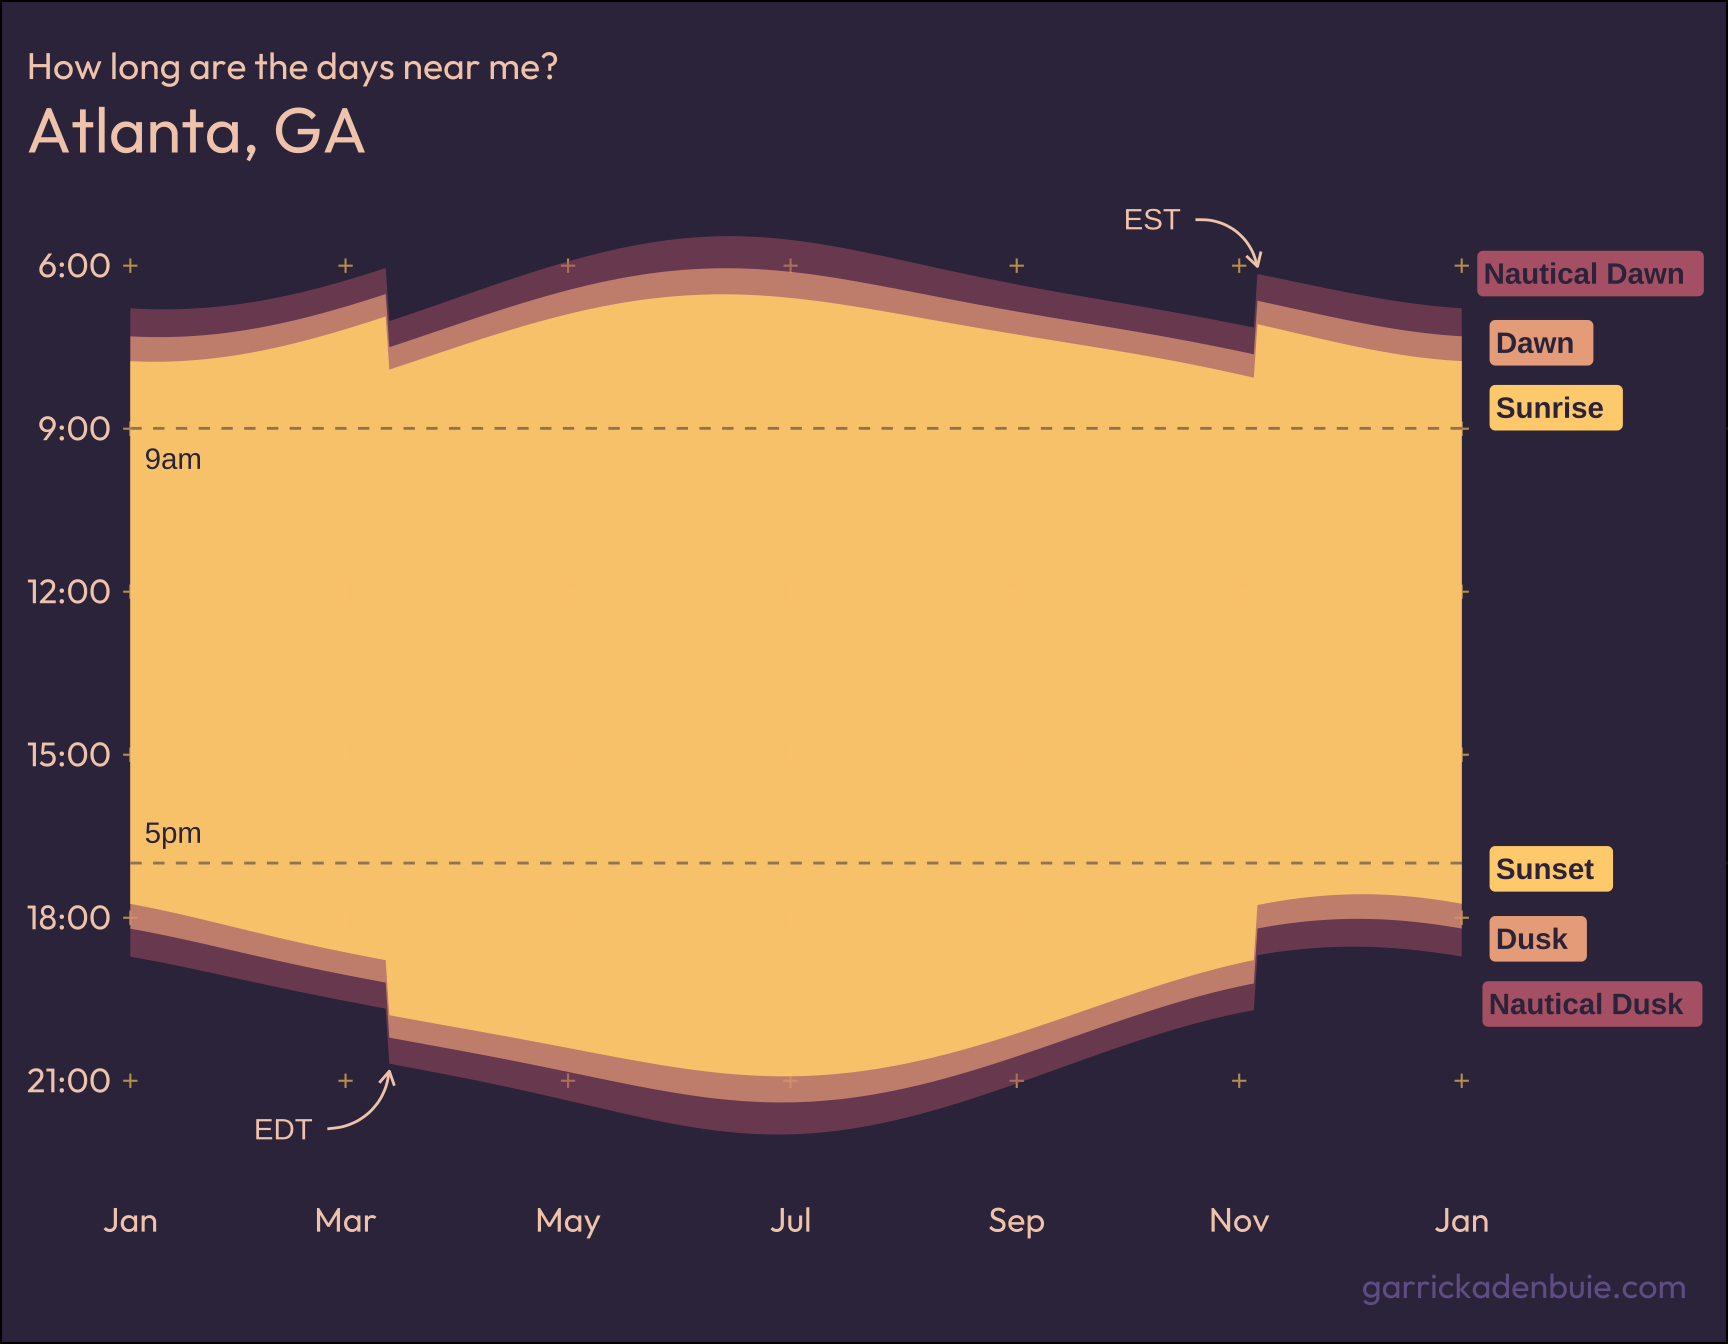 A heavily themed and customized ggplot2 plot of daylight hours in Atlanta. The colors are evocative of a sunrise, with dark violet background and soft sand-colored text and foreground colors. The plot highlights the change in timezone from EST to EDT with text labels and arrows pointing to the region where the sunlight hours shift one hour later in the day.